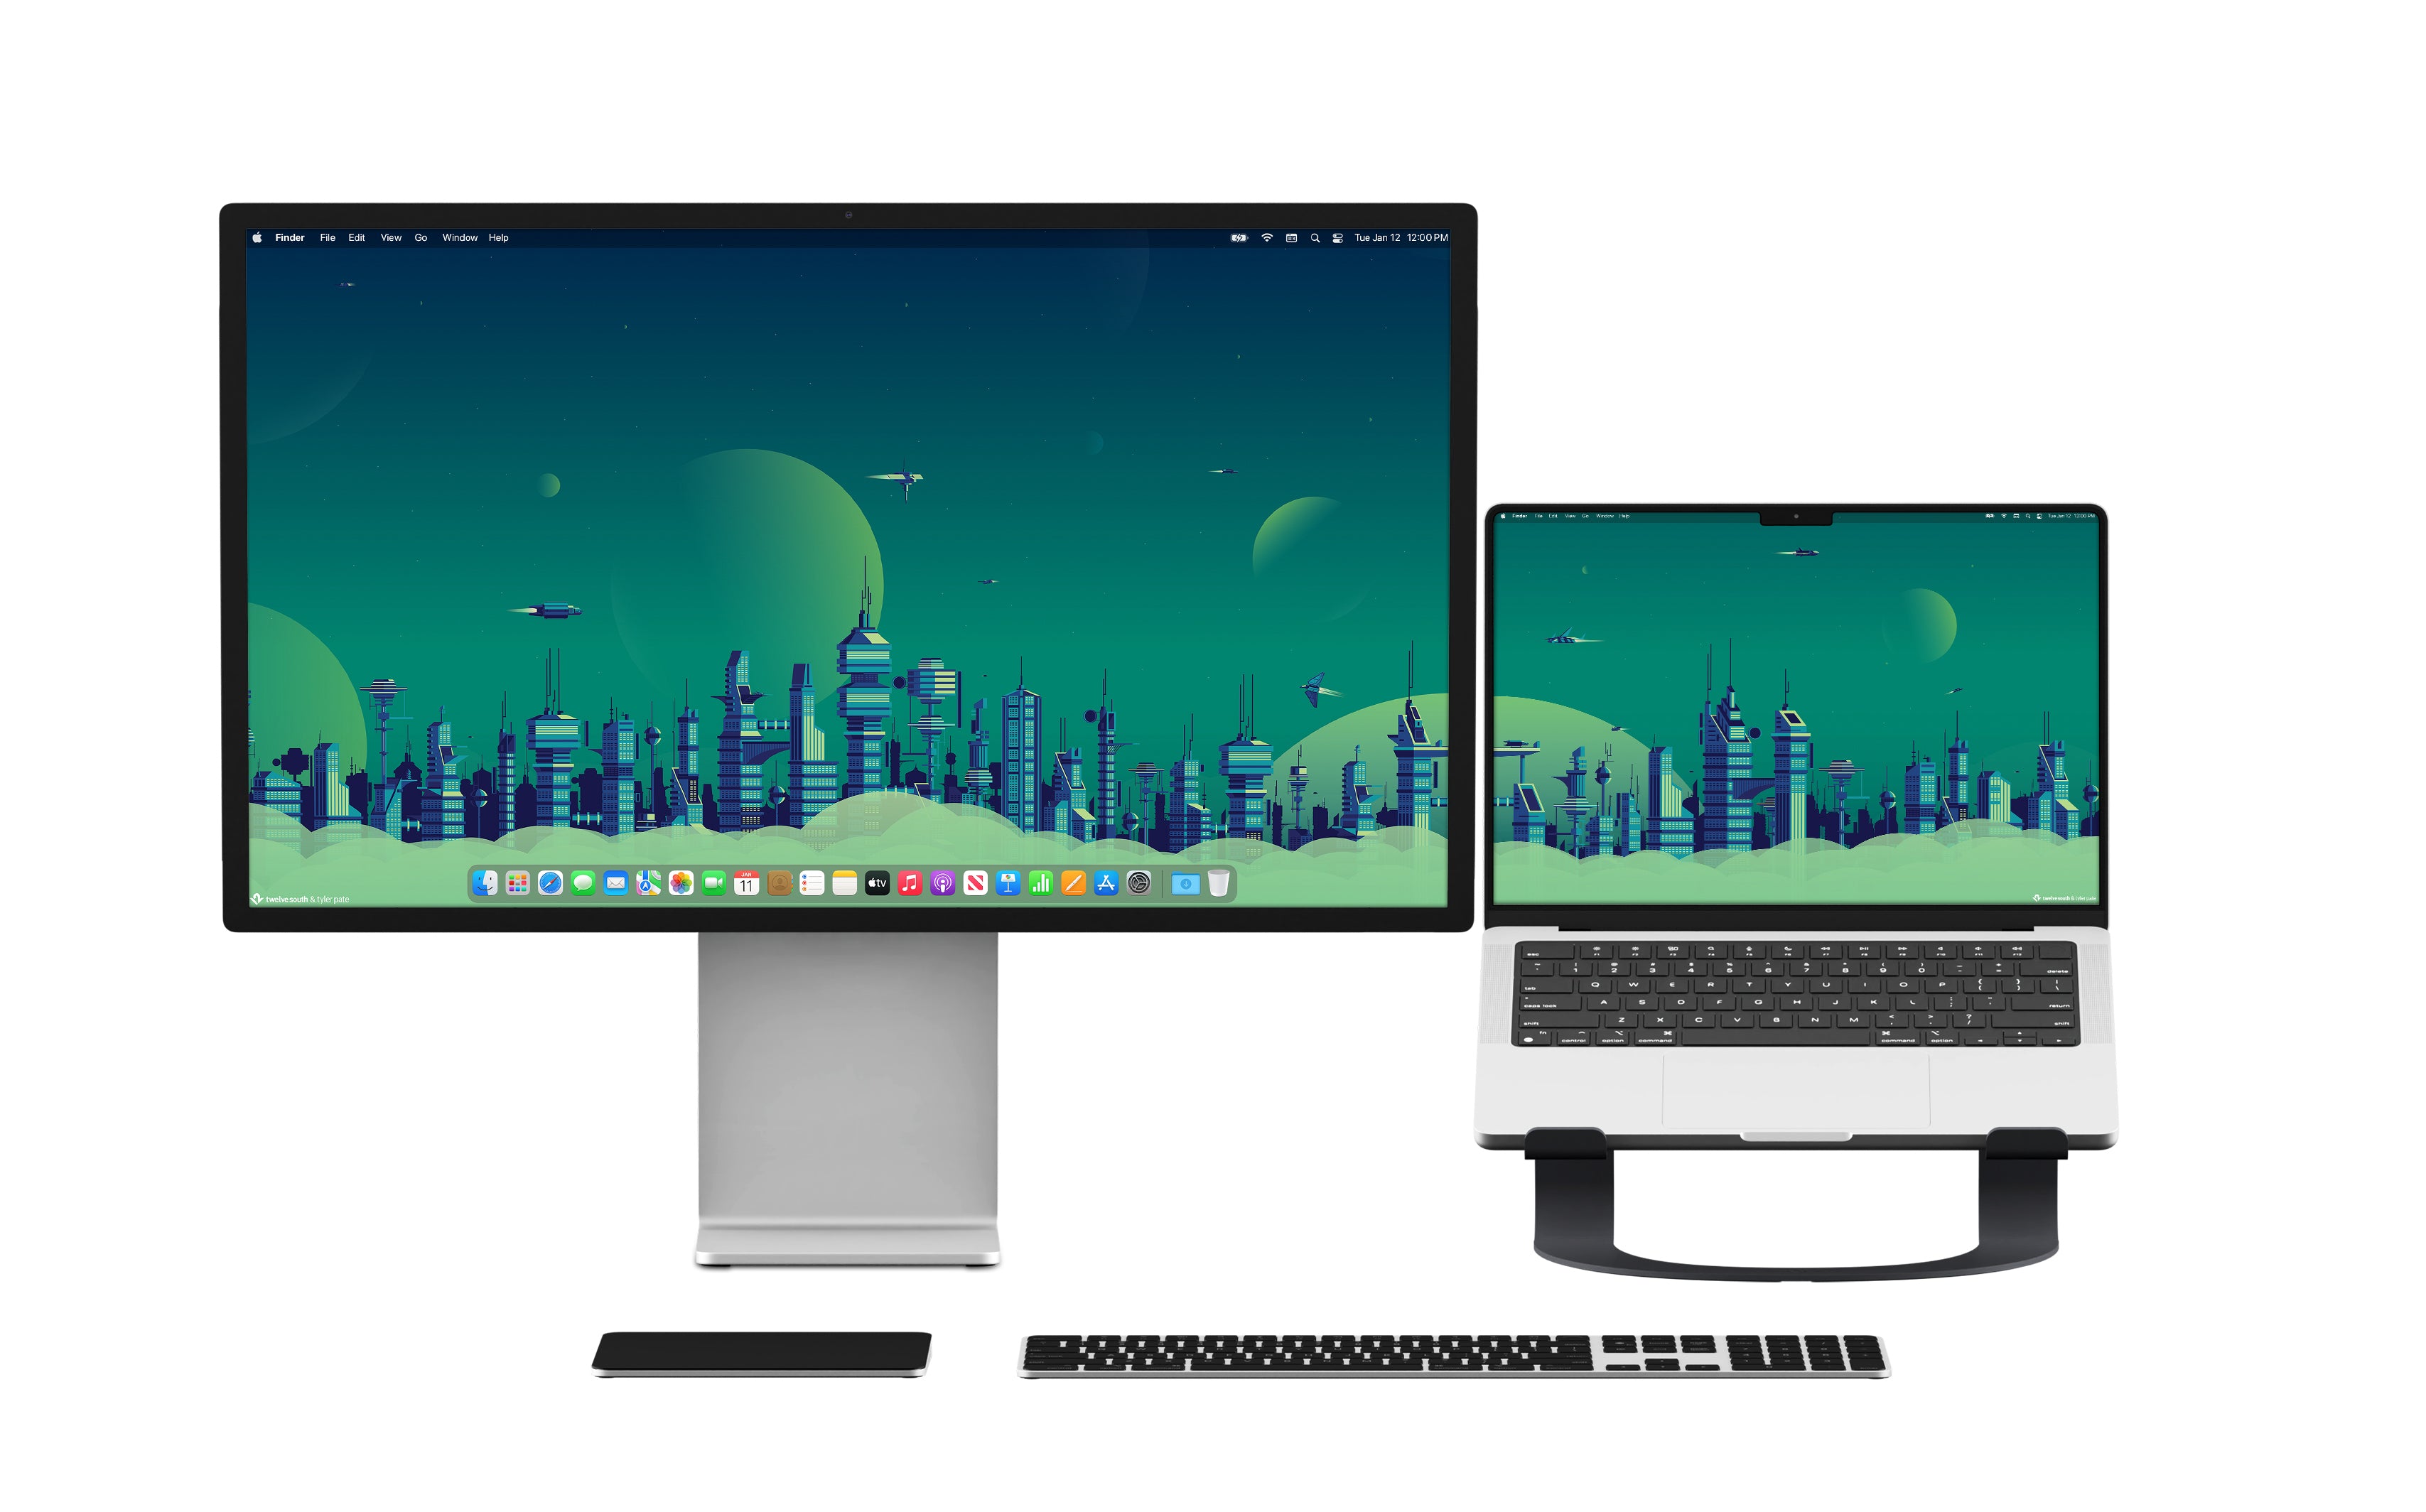 Star Wars inspired dual screen wallpapers by Twelve South